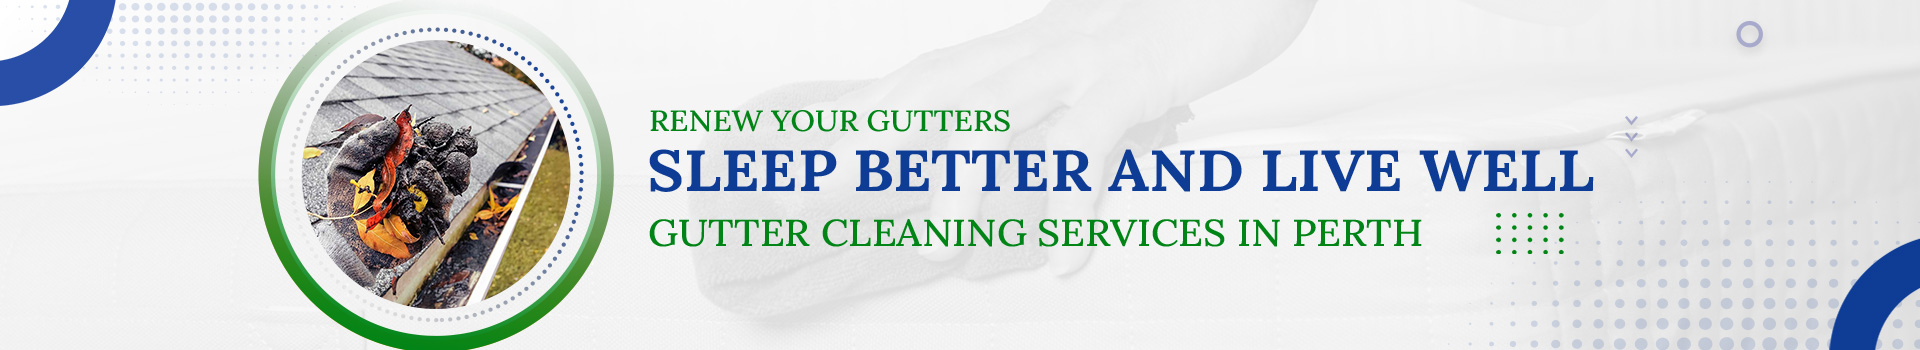 Gutter Cleaning services in Perth